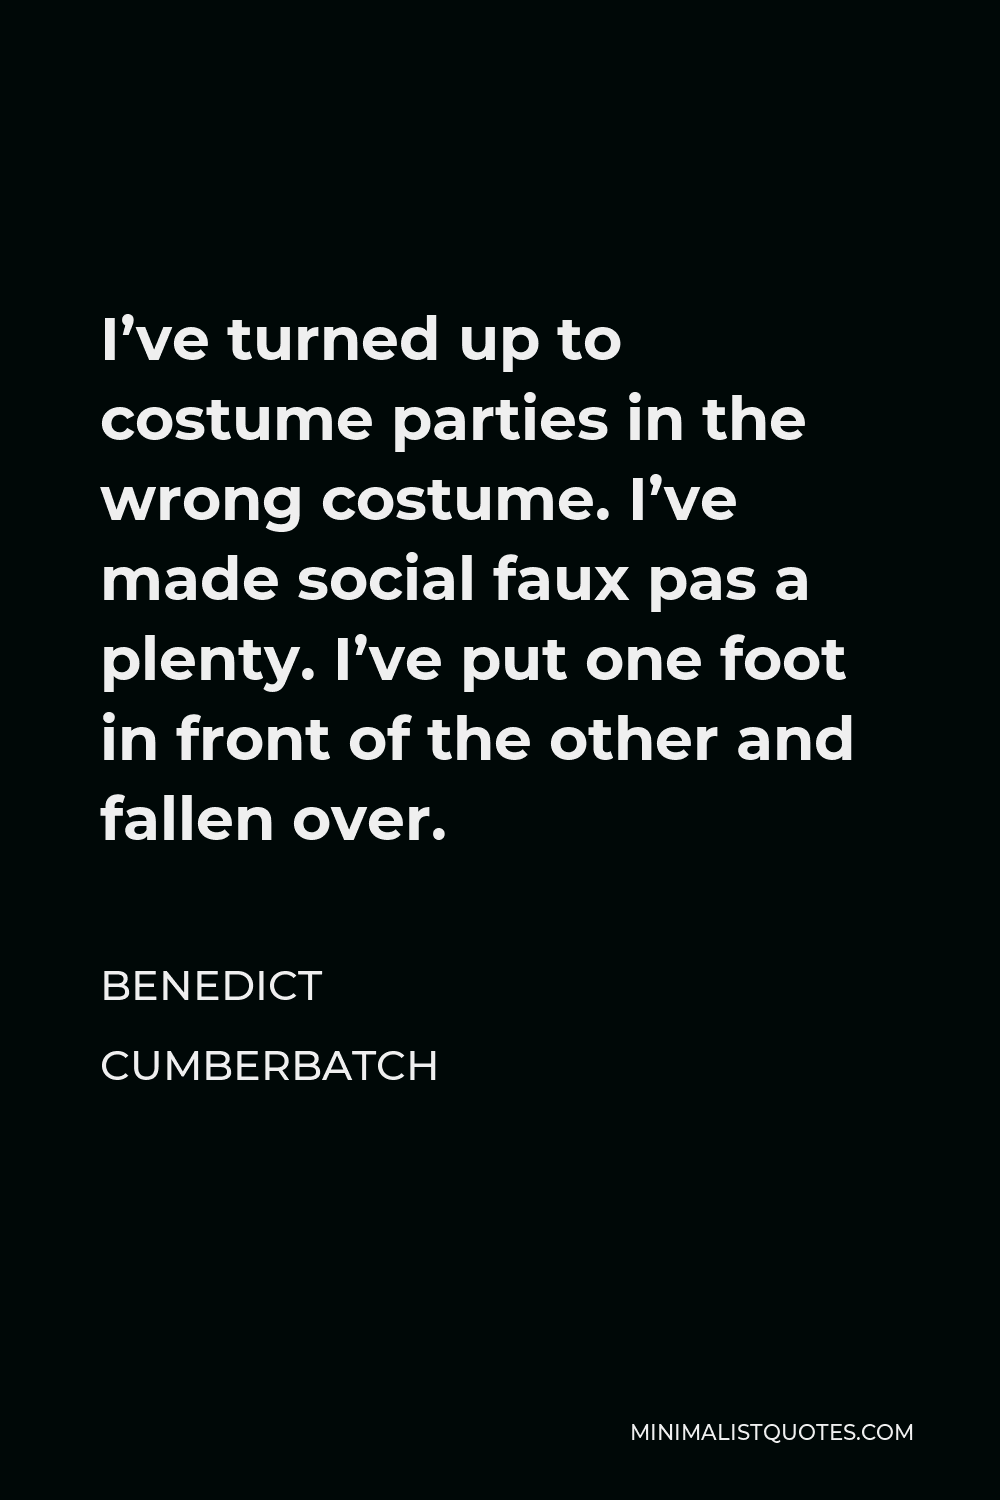 Benedict Cumberbatch Quote - I’ve turned up to costume parties in the wrong costume. I’ve made social faux pas a plenty. I’ve put one foot in front of the other and fallen over.